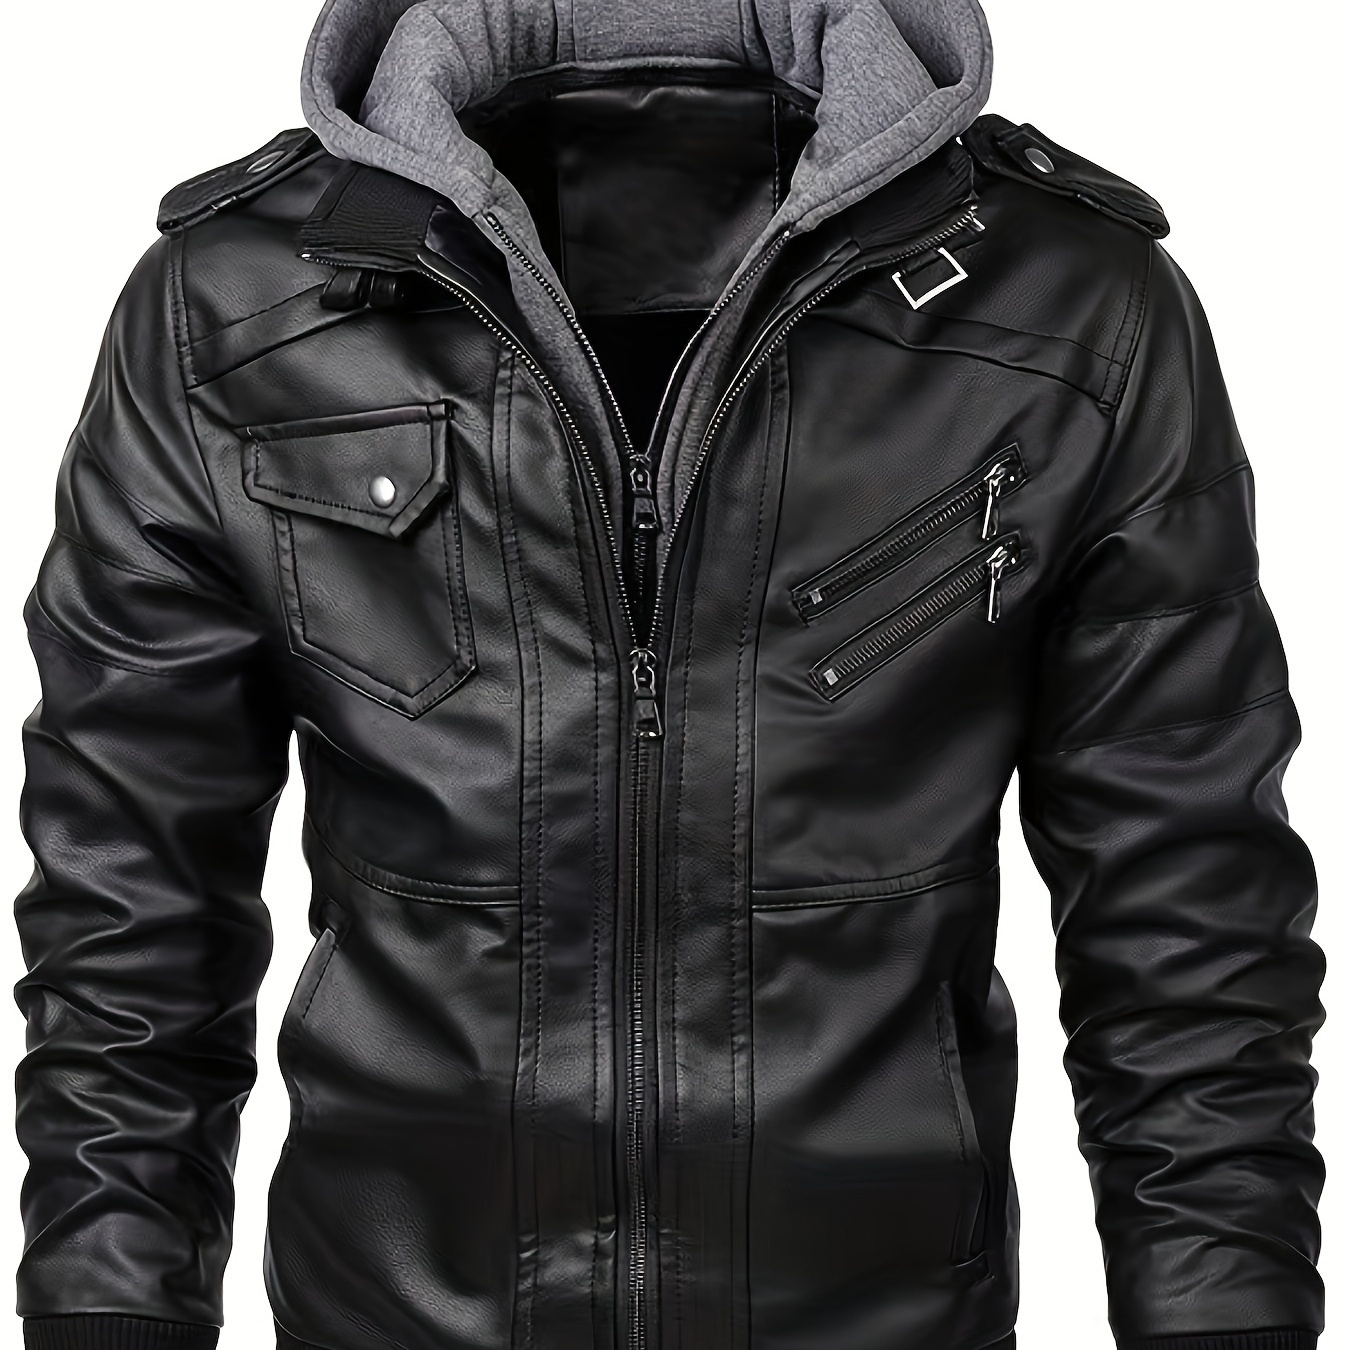 

Men's Wool Lined Bomber Jacket With Hood, Regular Fit Coat With Multiple Pockets, Zipper Closure, Casual Outdoor Wear